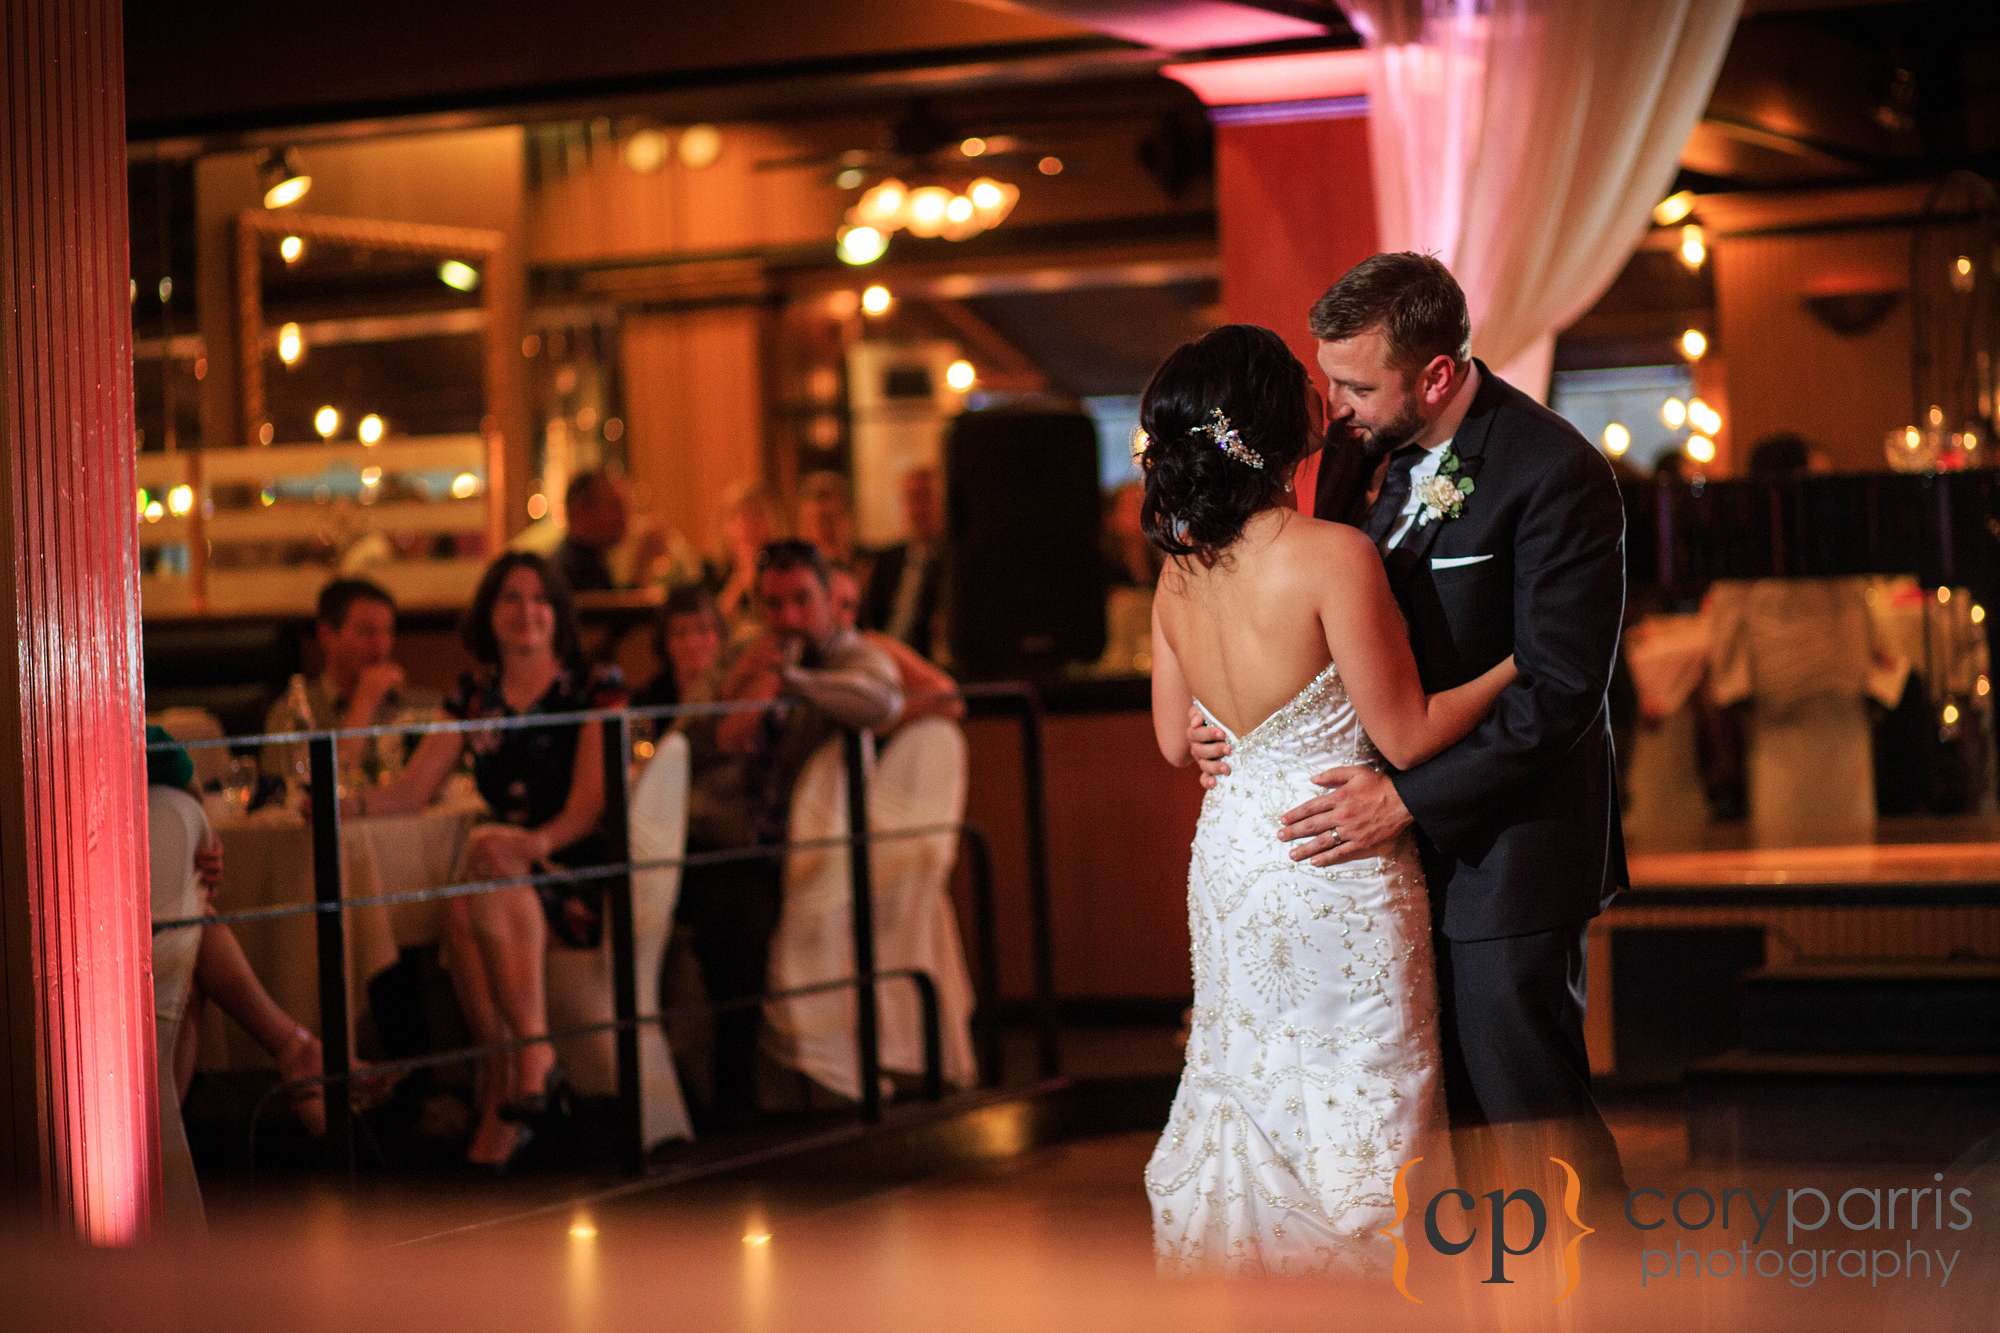 First dance at Lake Union Cafe